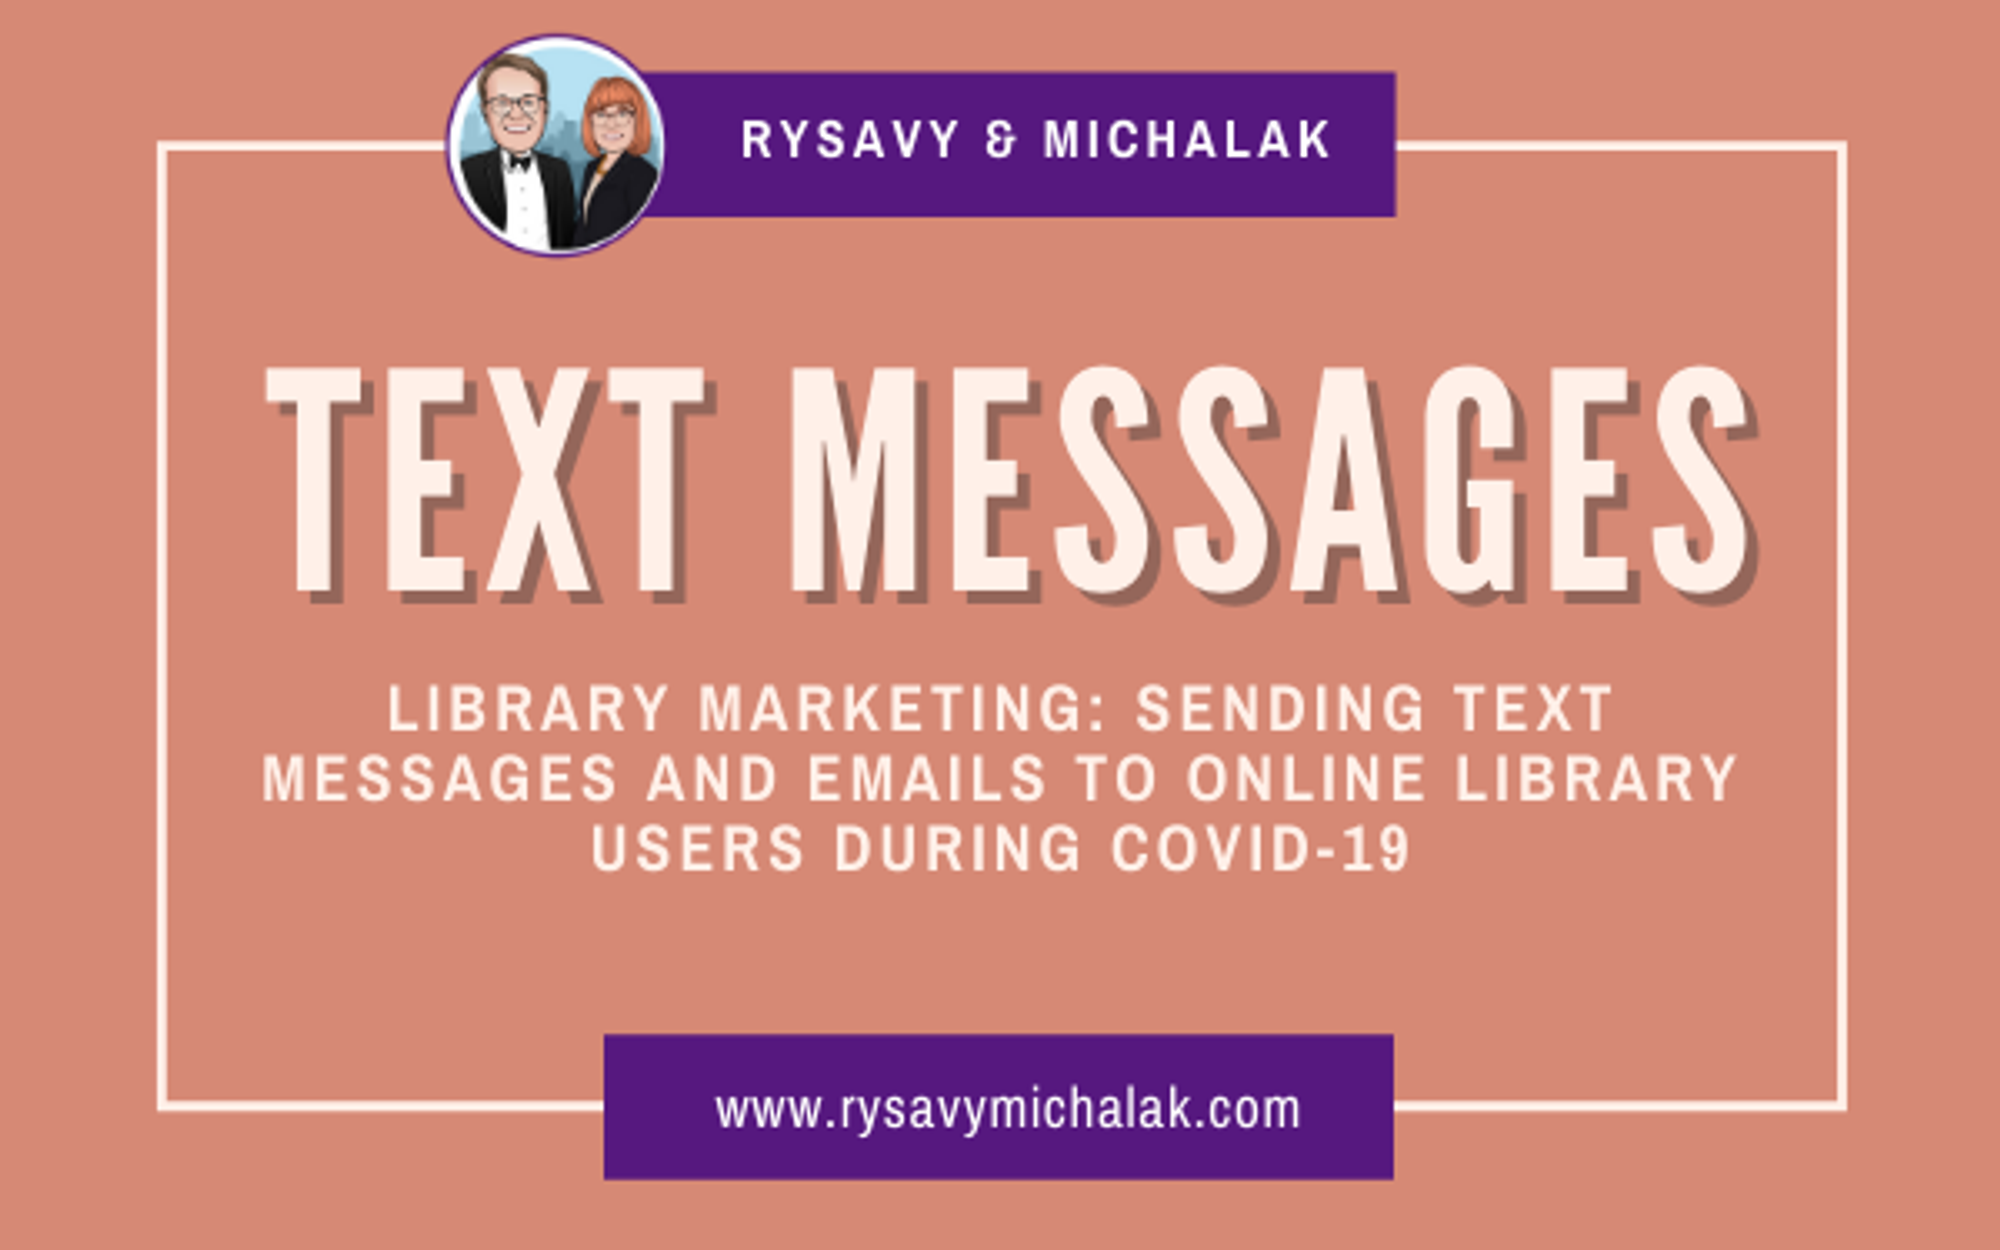 Library Marketing: Sending Text Messages and Emails to Online Library Users During COVID-19